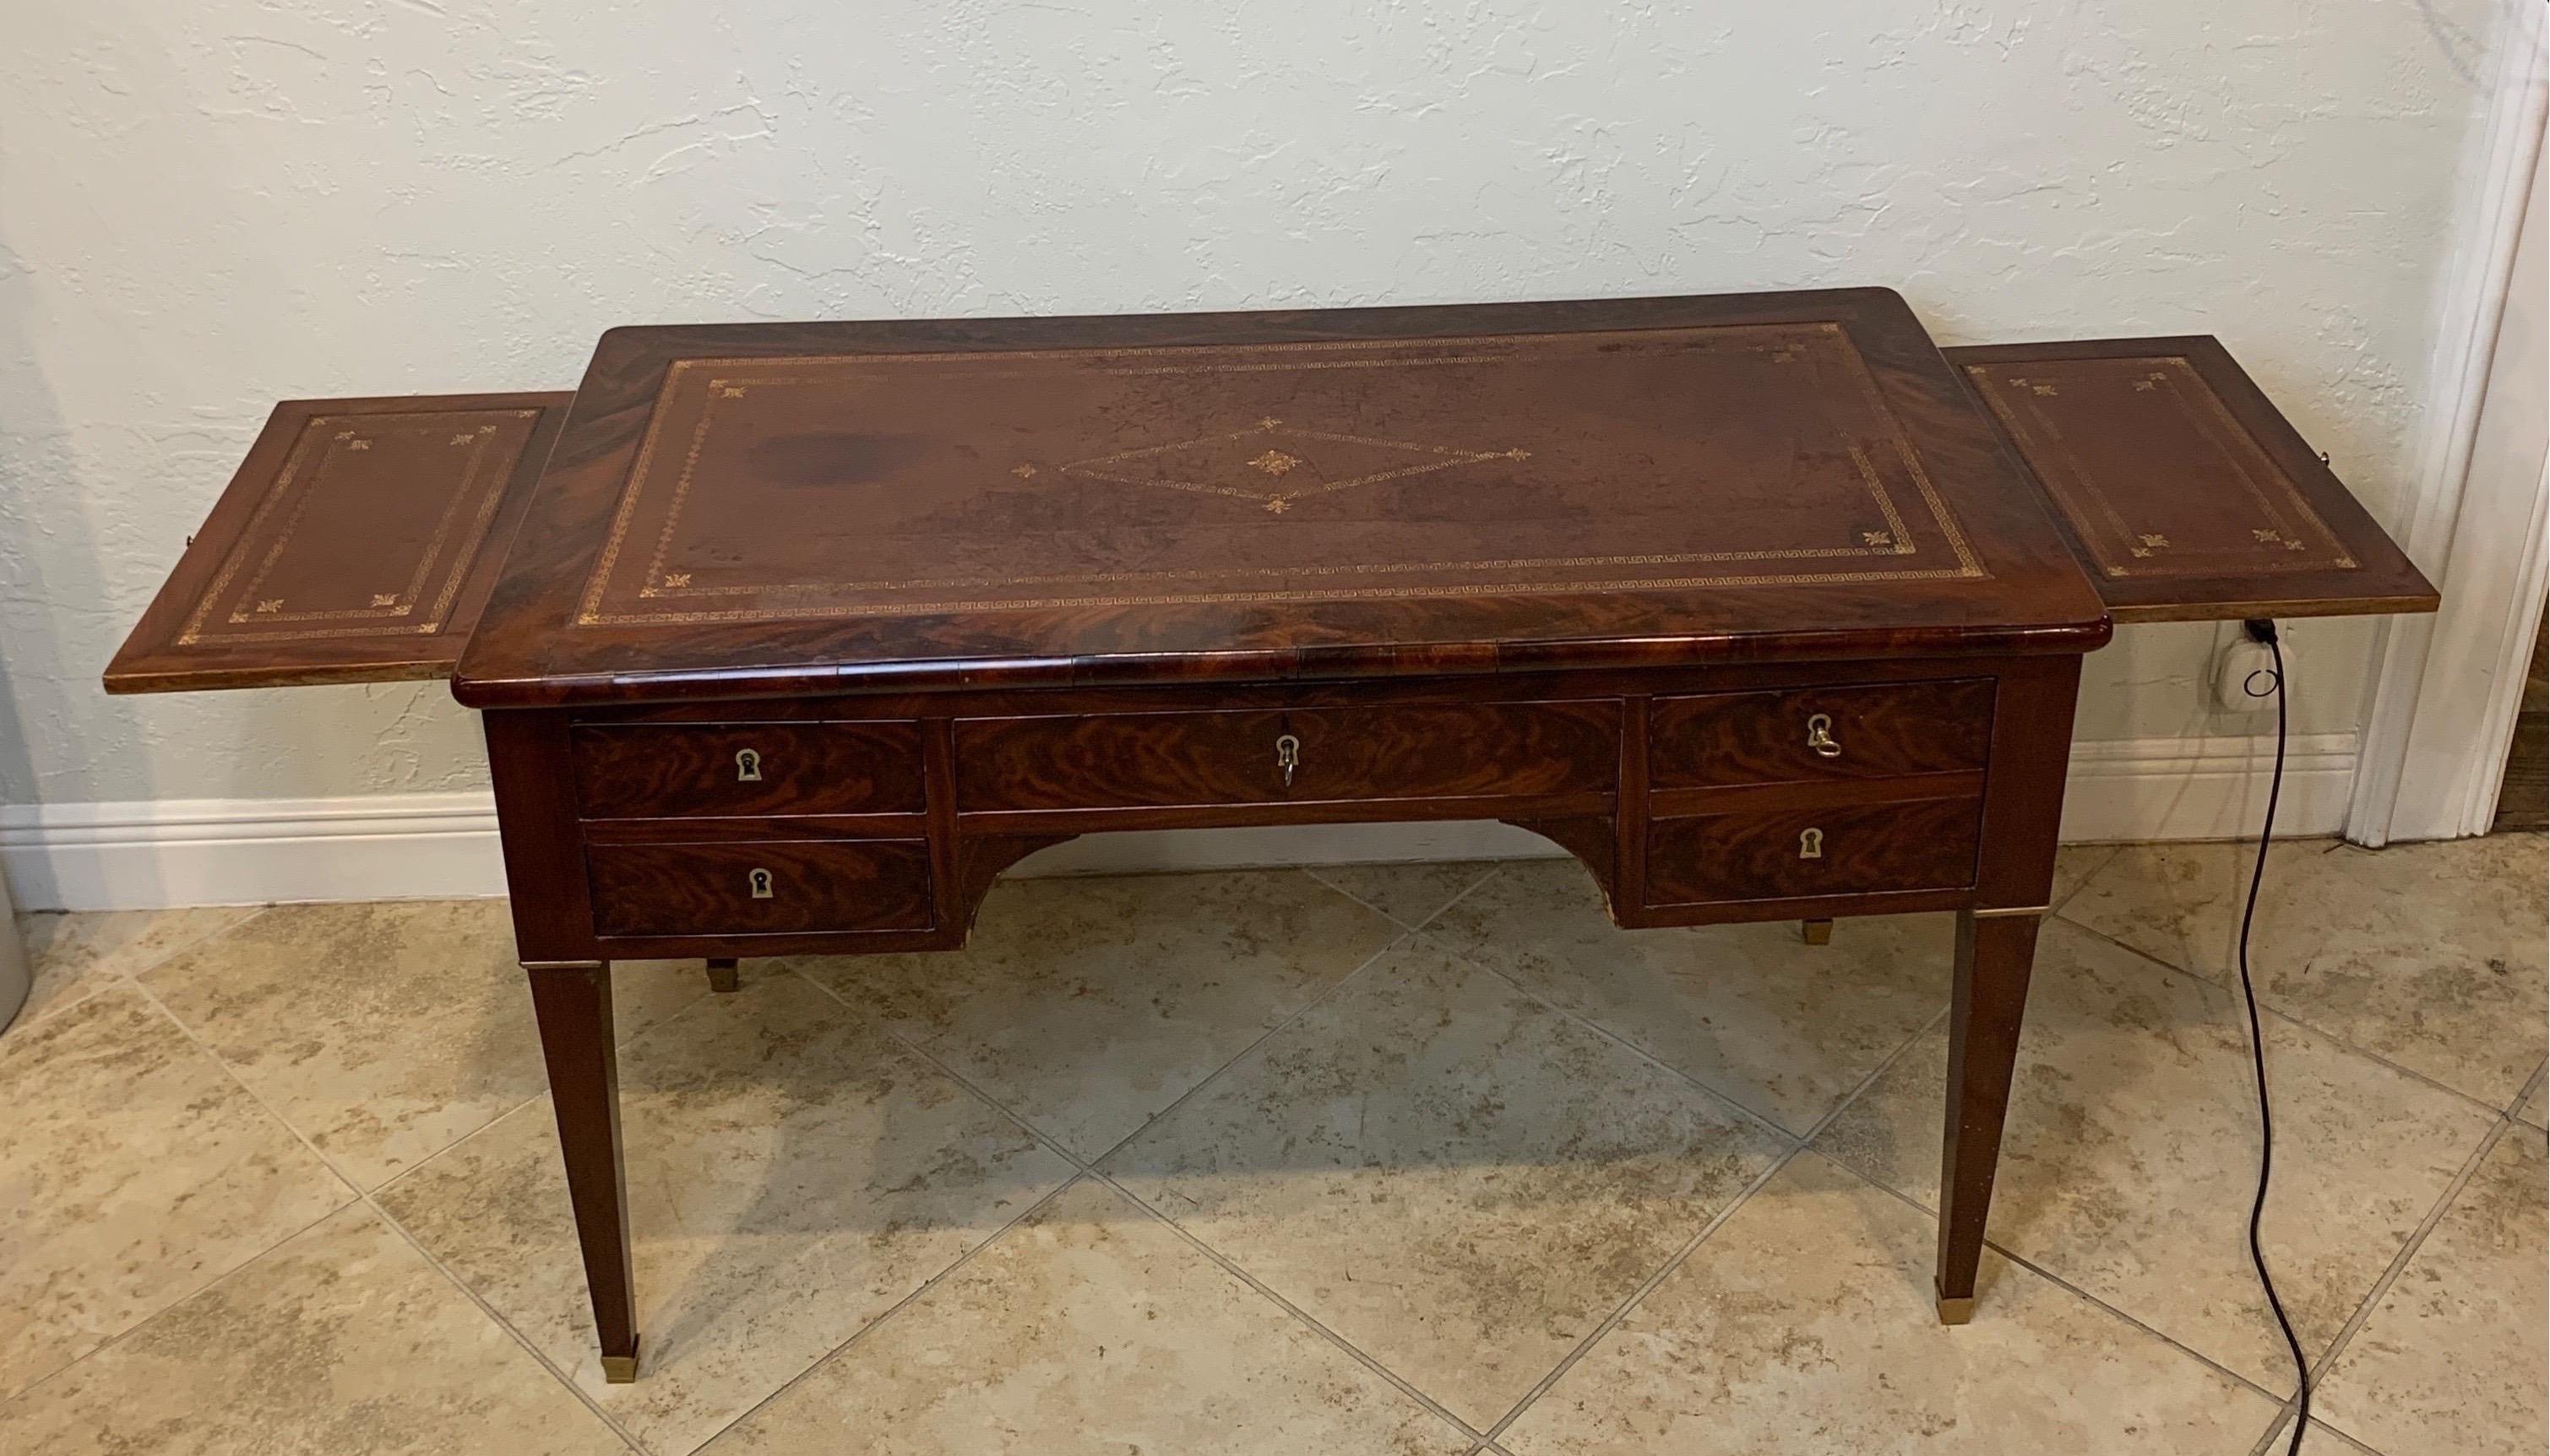 Wonderful 19th century French Louis Philippe writing desk with a tooled leather top. Well figure crotched mahogany. Comes with four drawers and leather writing surfaces pull out on each side. Leather is in good used condition. One drawer reveals a